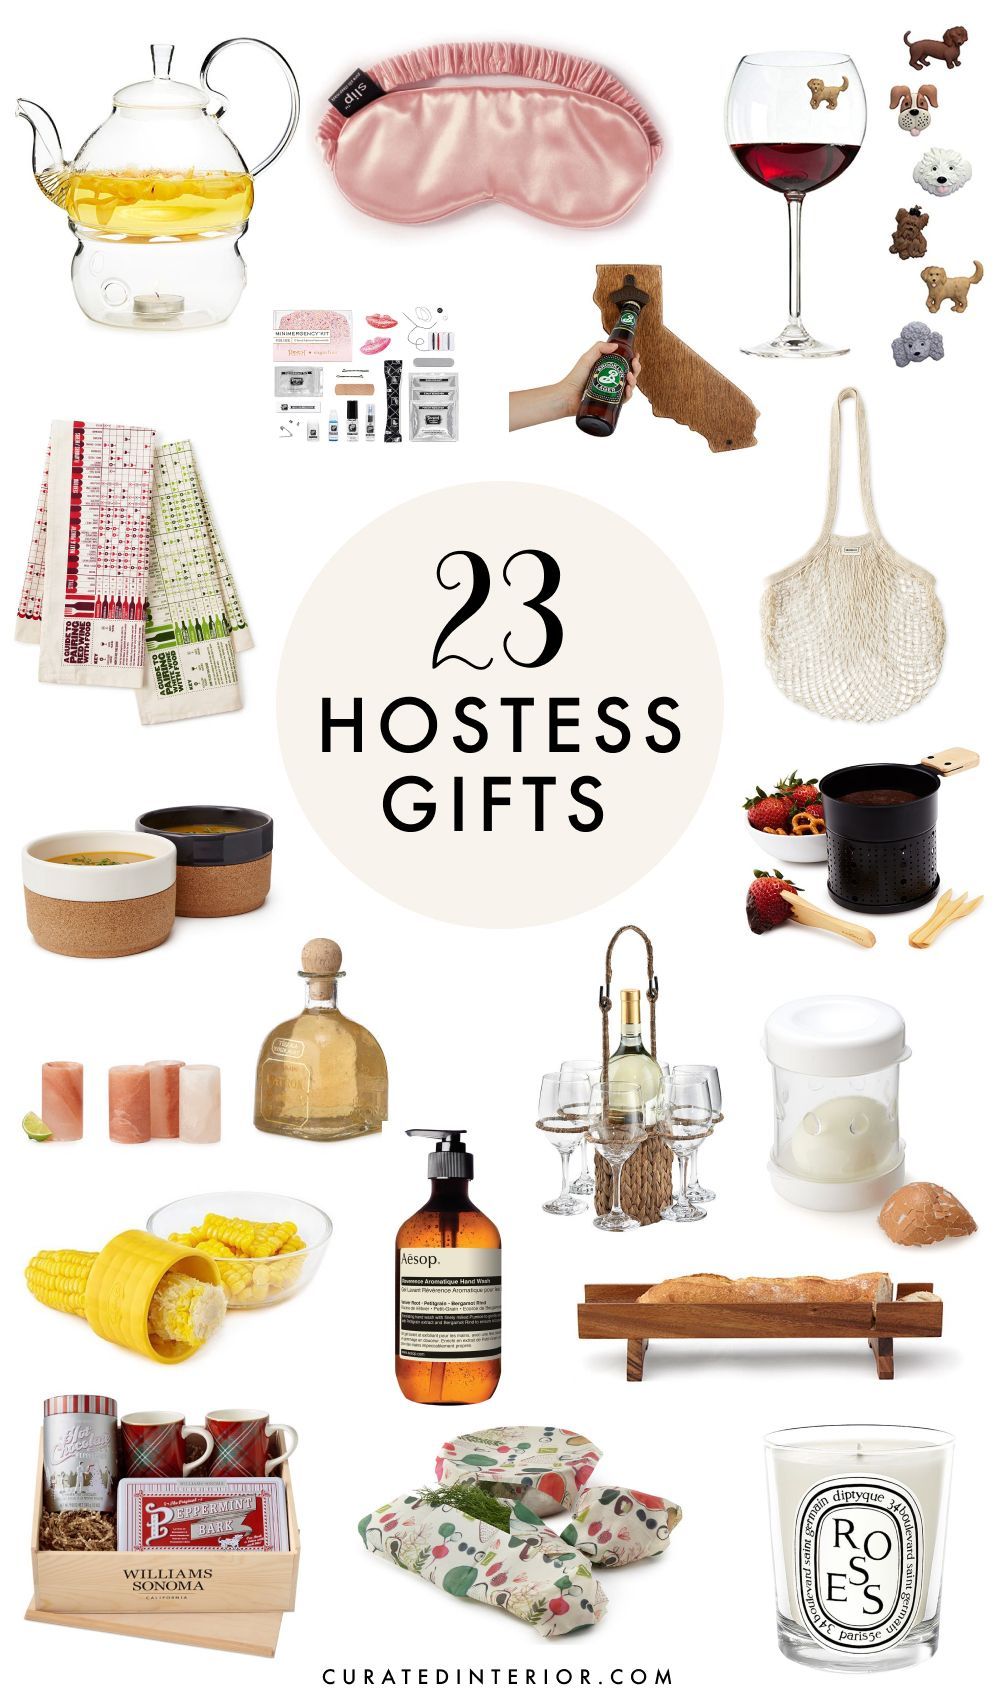 When should you not bring a hostess gift